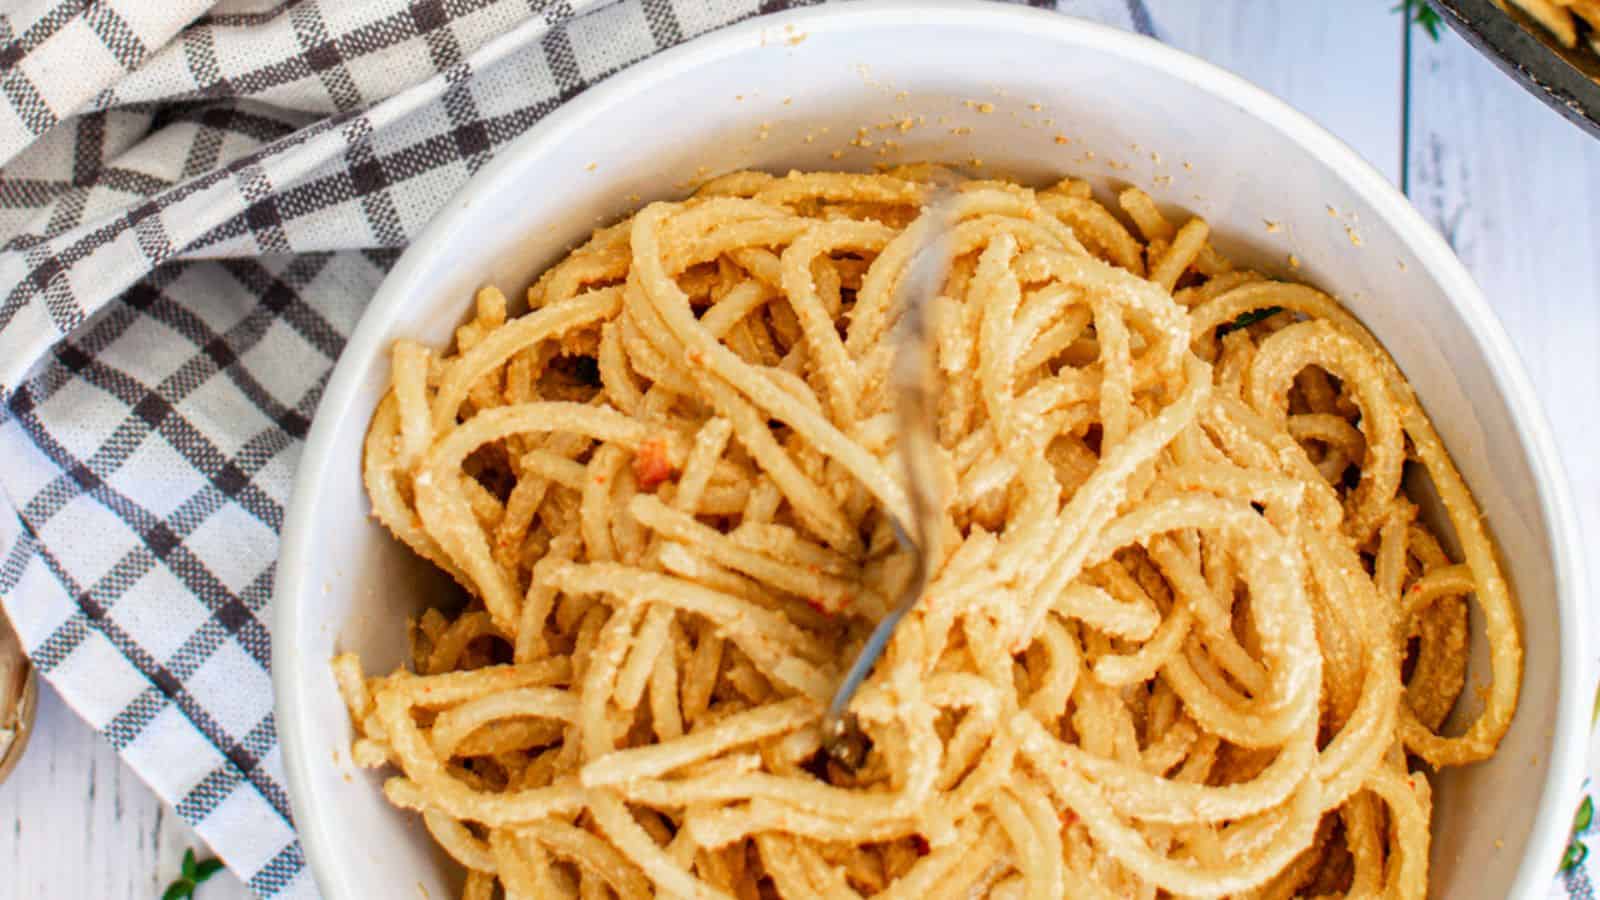 <p>For a dish that's both simple and stunning, try our Creamy Vegan Red Pepper Pasta. Each bite is packed with the sweet and smoky flavor of red peppers. It's easy to whip up on a busy night and sure to impress. A vegan delight that comes together in minutes.<br><strong>Get the Recipe: </strong><a href="https://twocityvegans.com/creamy-vegan-red-pepper-pasta/?utm_source=msn&utm_medium=page&utm_campaign=">Creamy Vegan Red Pepper Pasta</a></p>